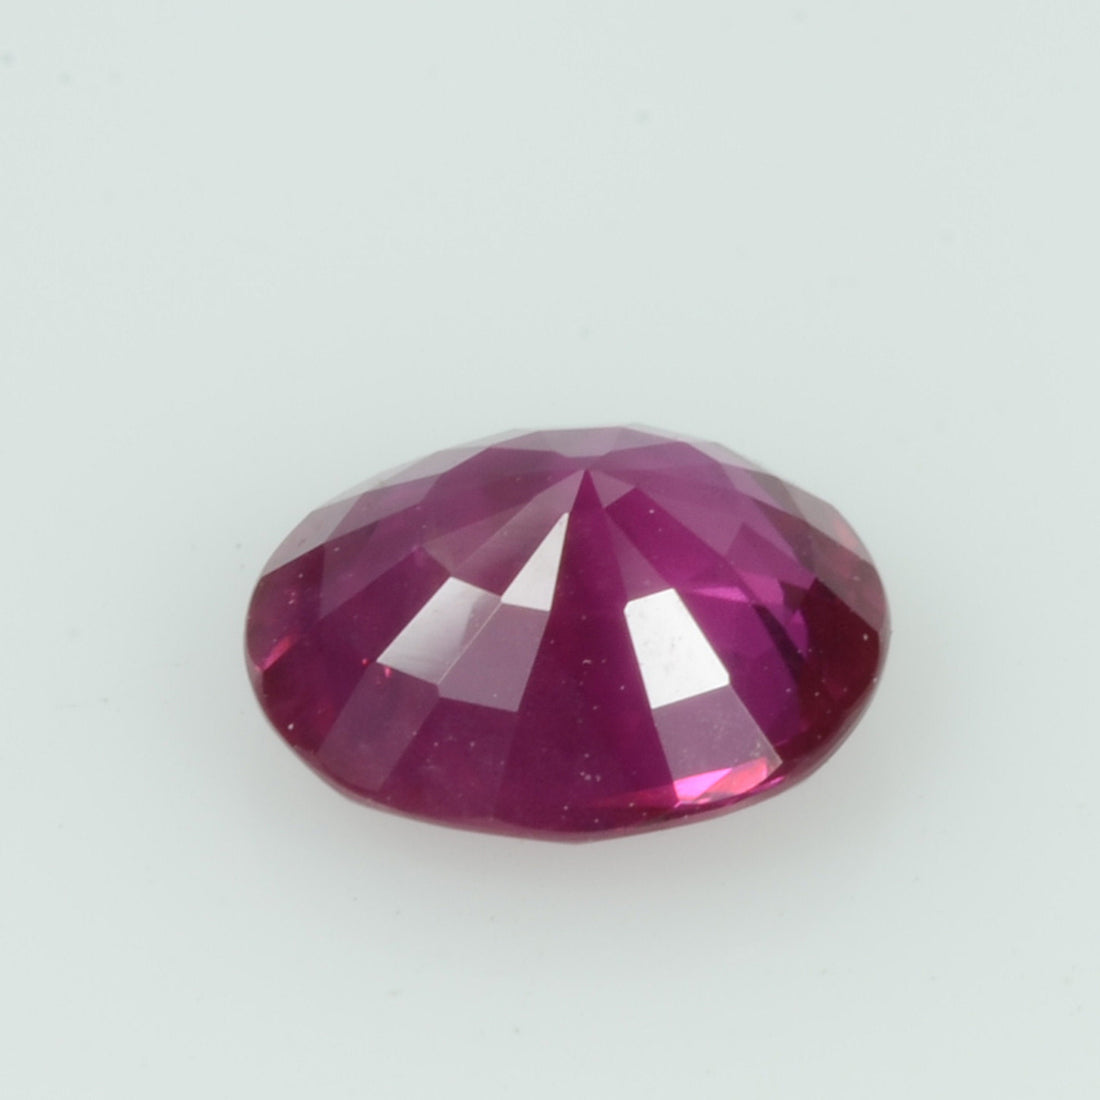 1.21 Cts Natural Vietnam Ruby Loose Gemstone Oval Cut